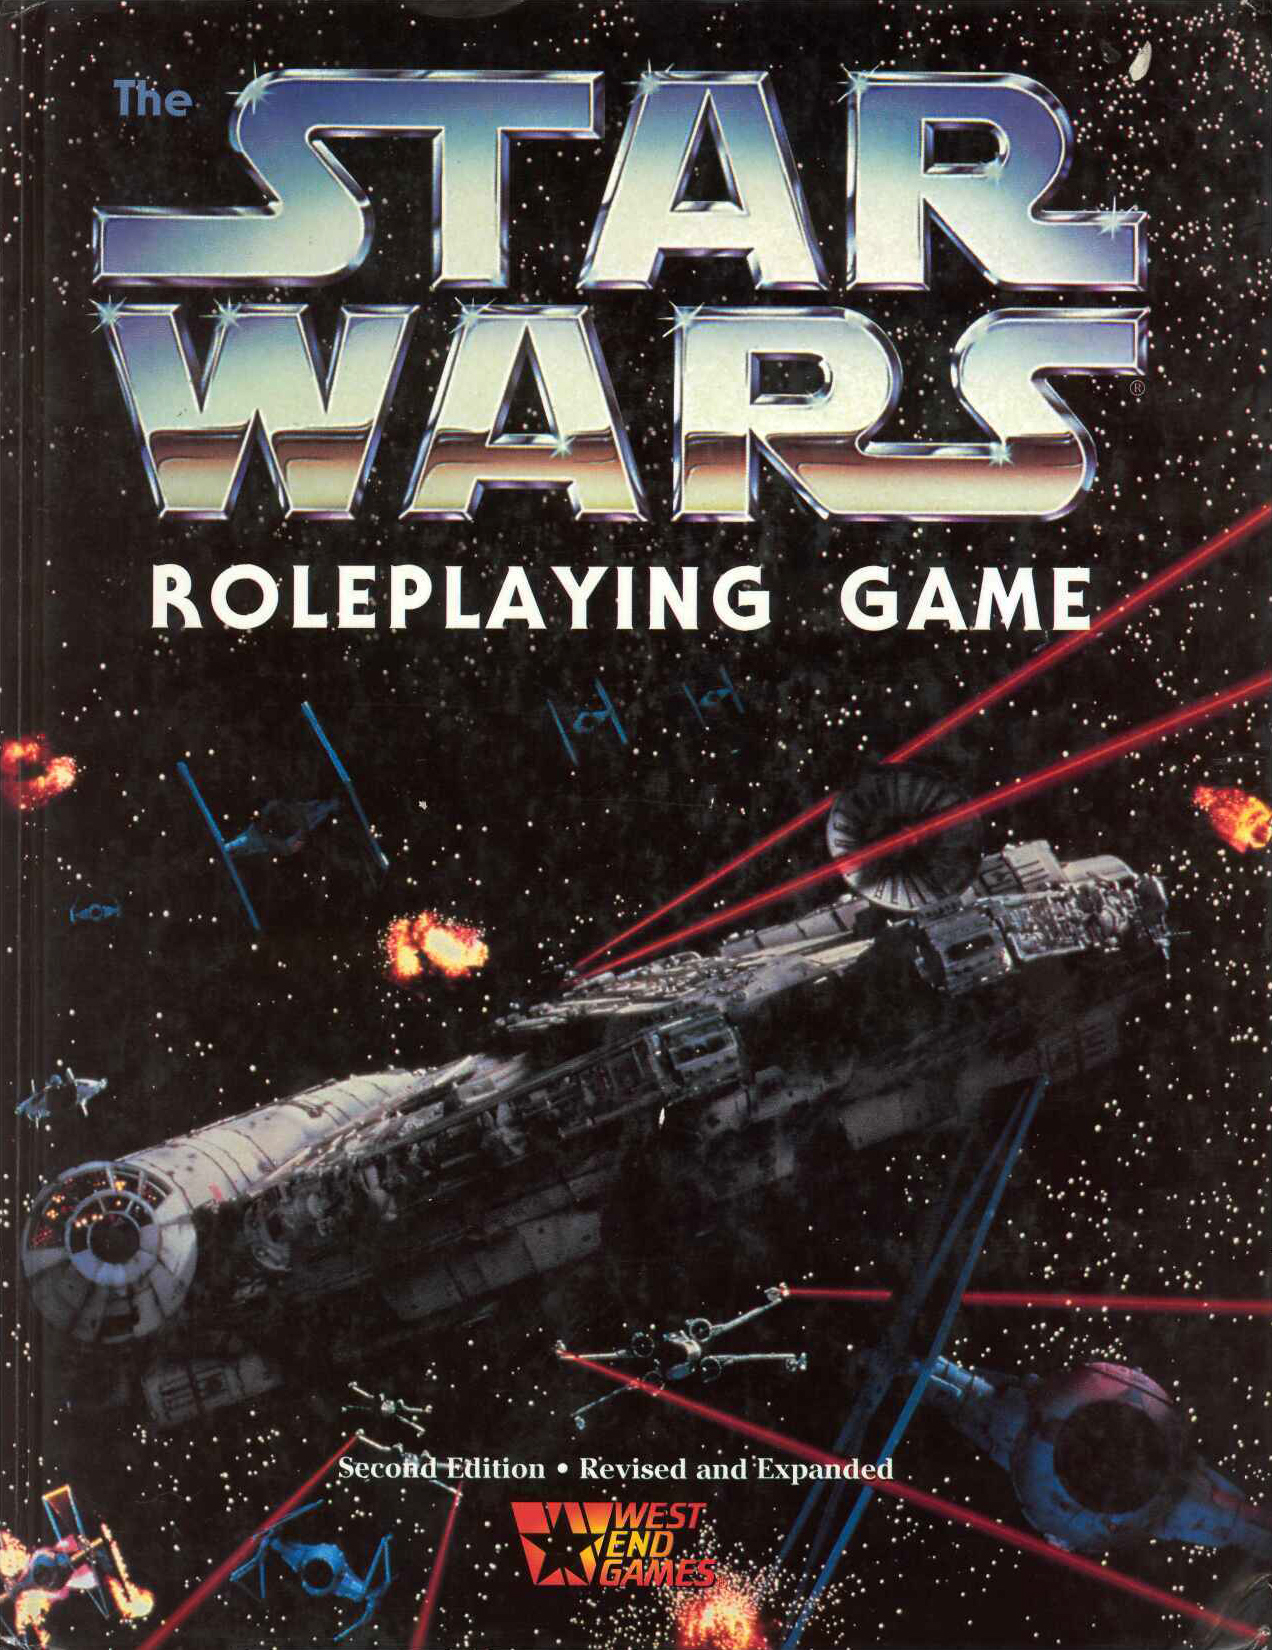 West End Games Roleplaying Game